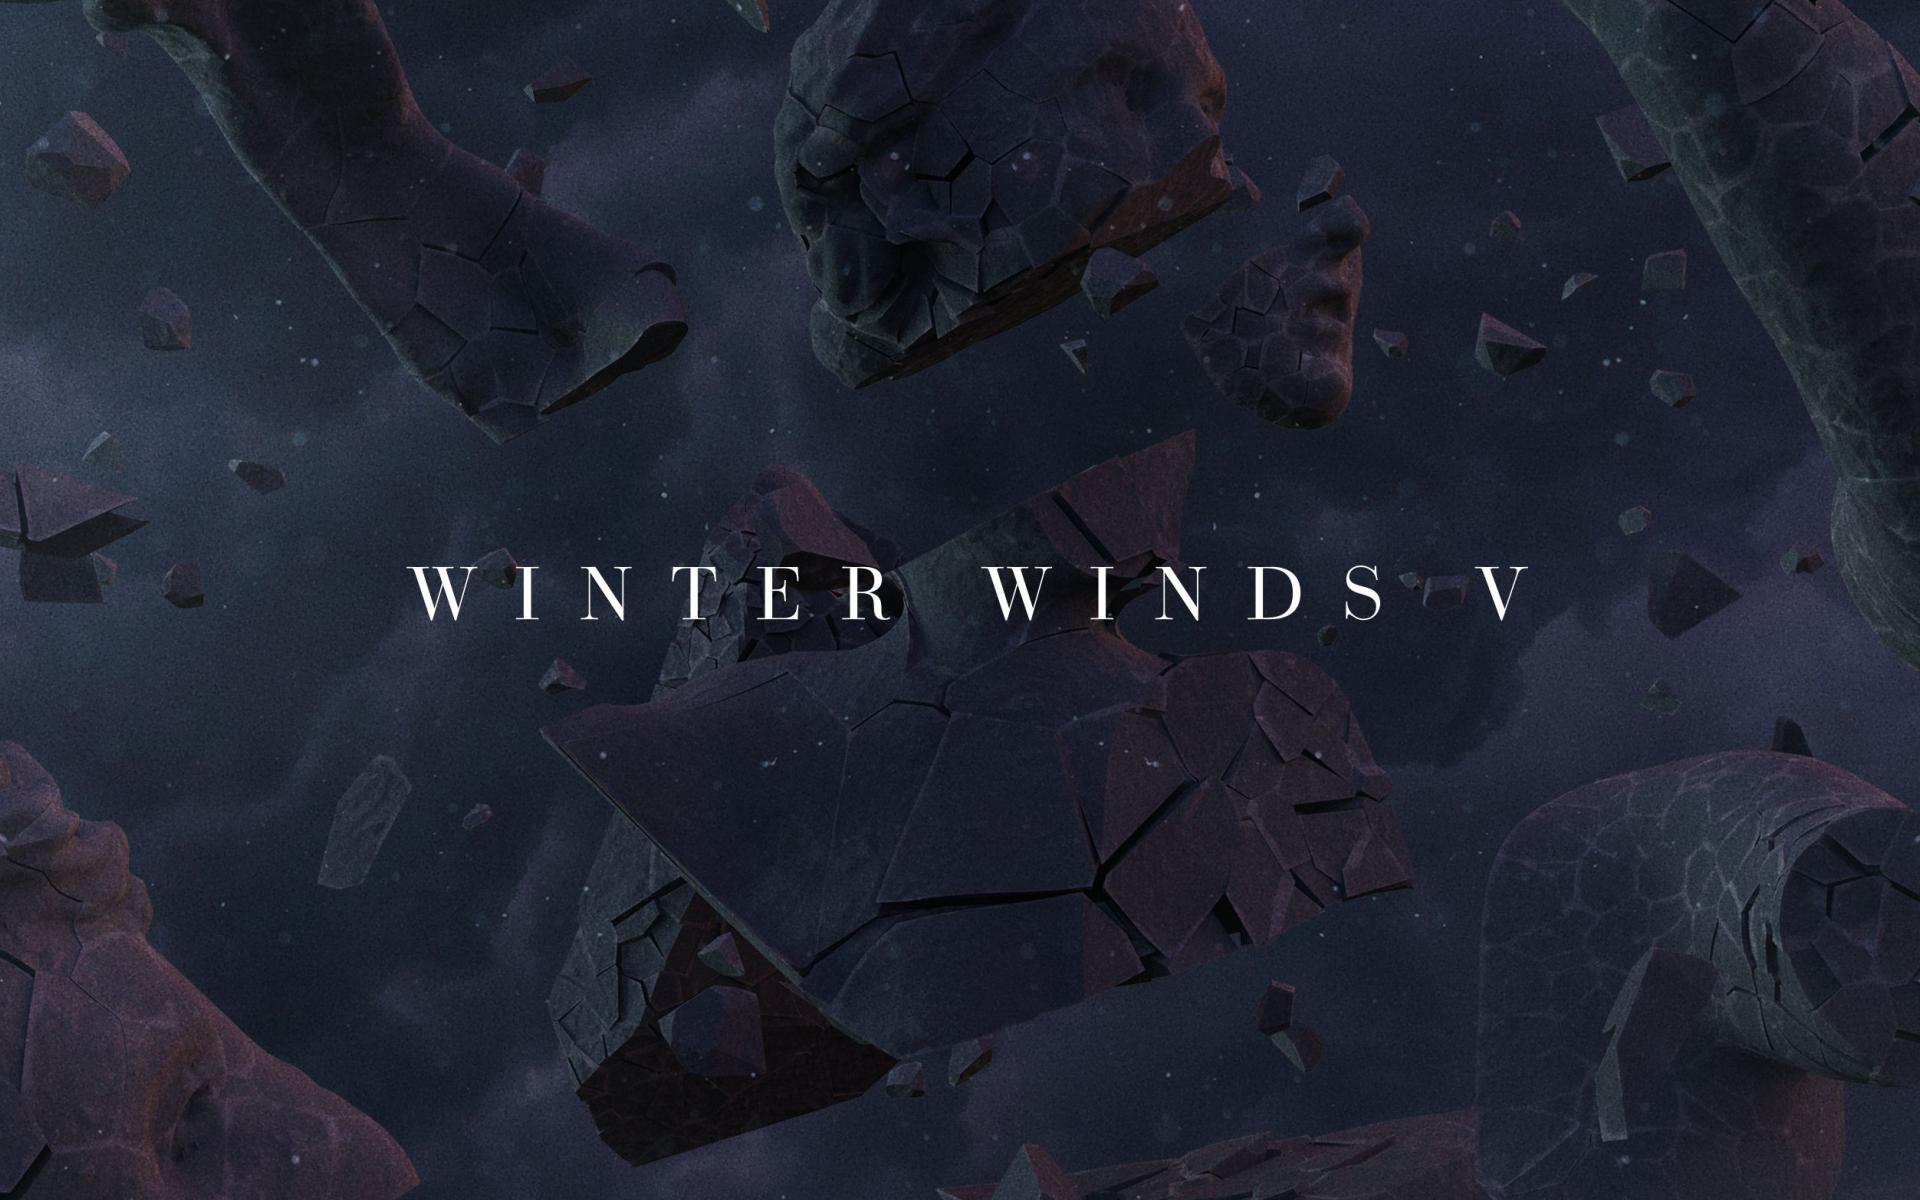 TSUKI - Lapse from V.A. WINTER WINDS vol. 5